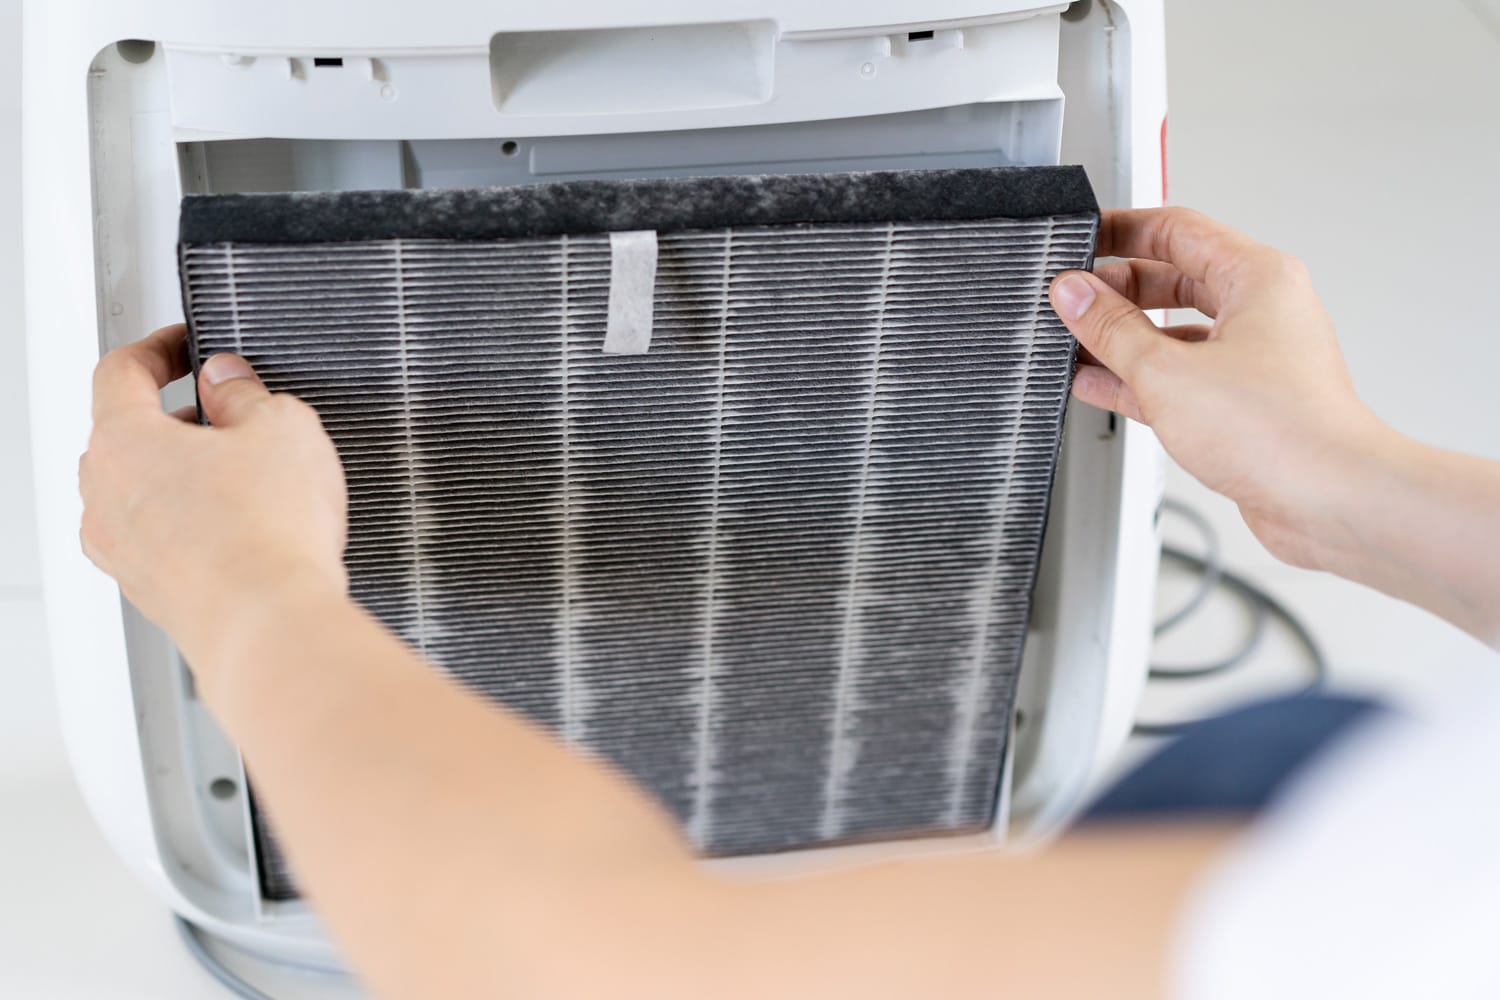 Asian woman changing the dirty air purifier filter after using for a long time in the dirty air environment. Using air purifier clean the air for better atmosphere in a house. 